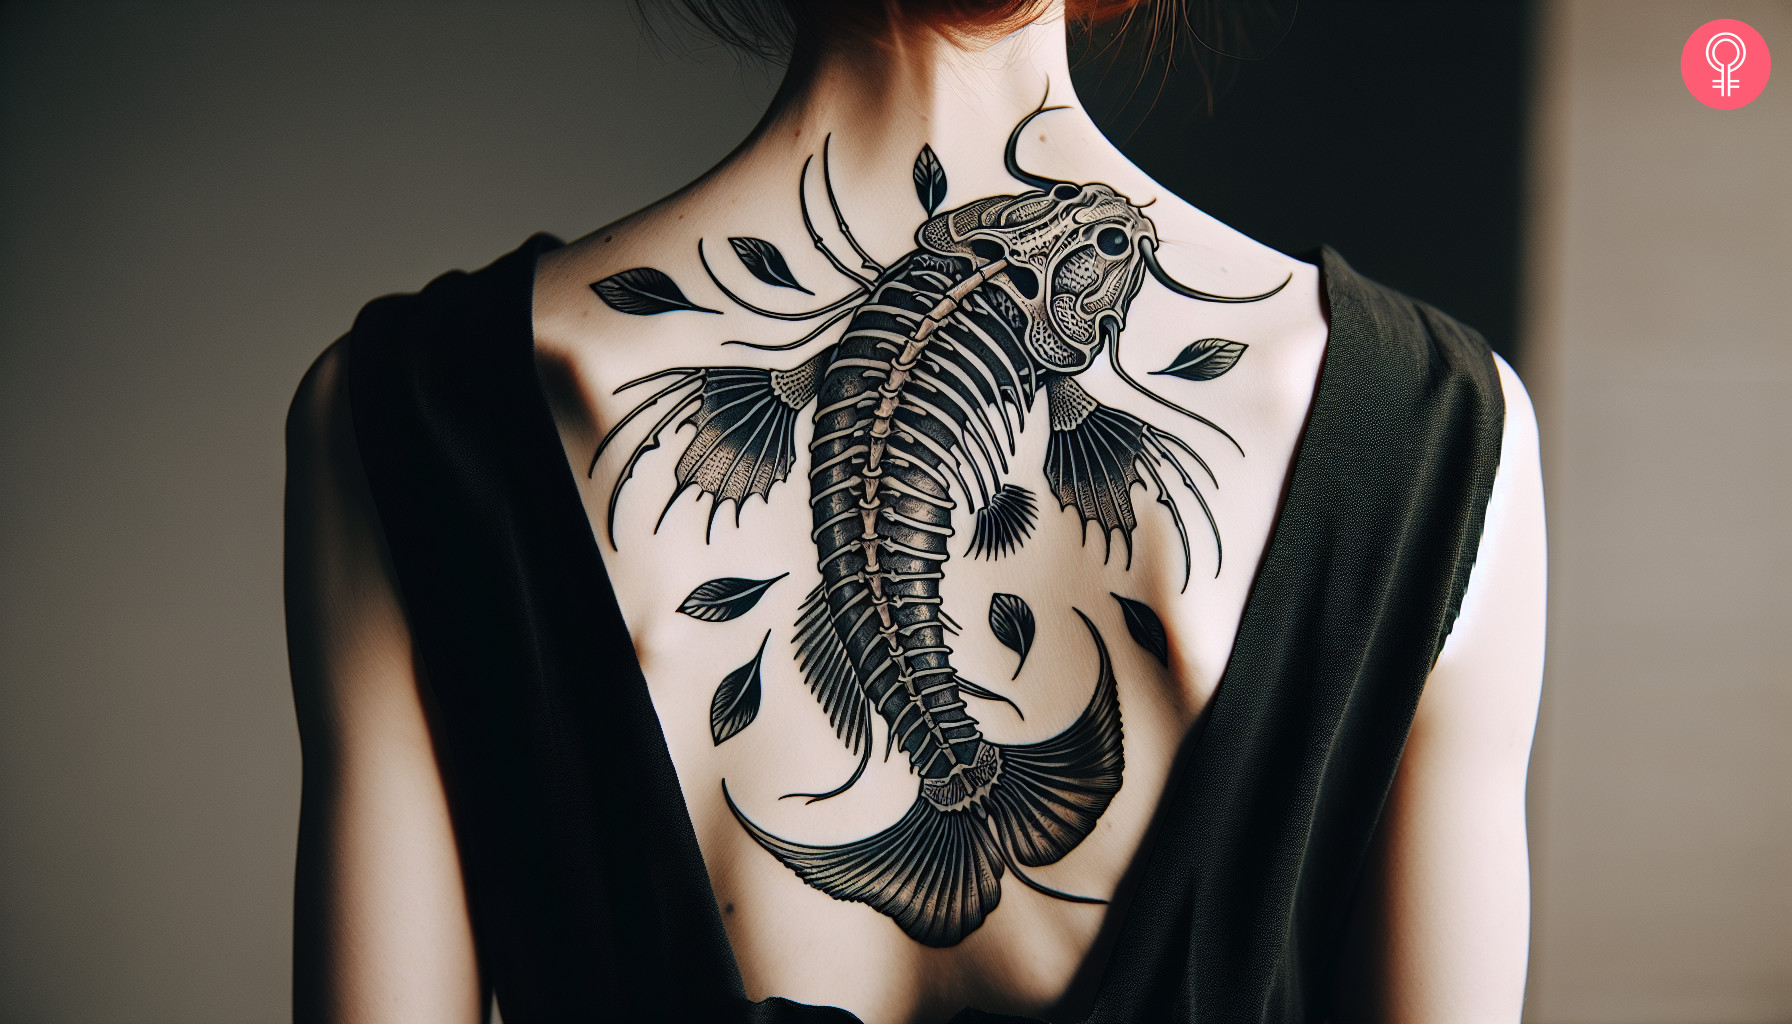 Woman with a catfish skeleton tattoo on her upper back